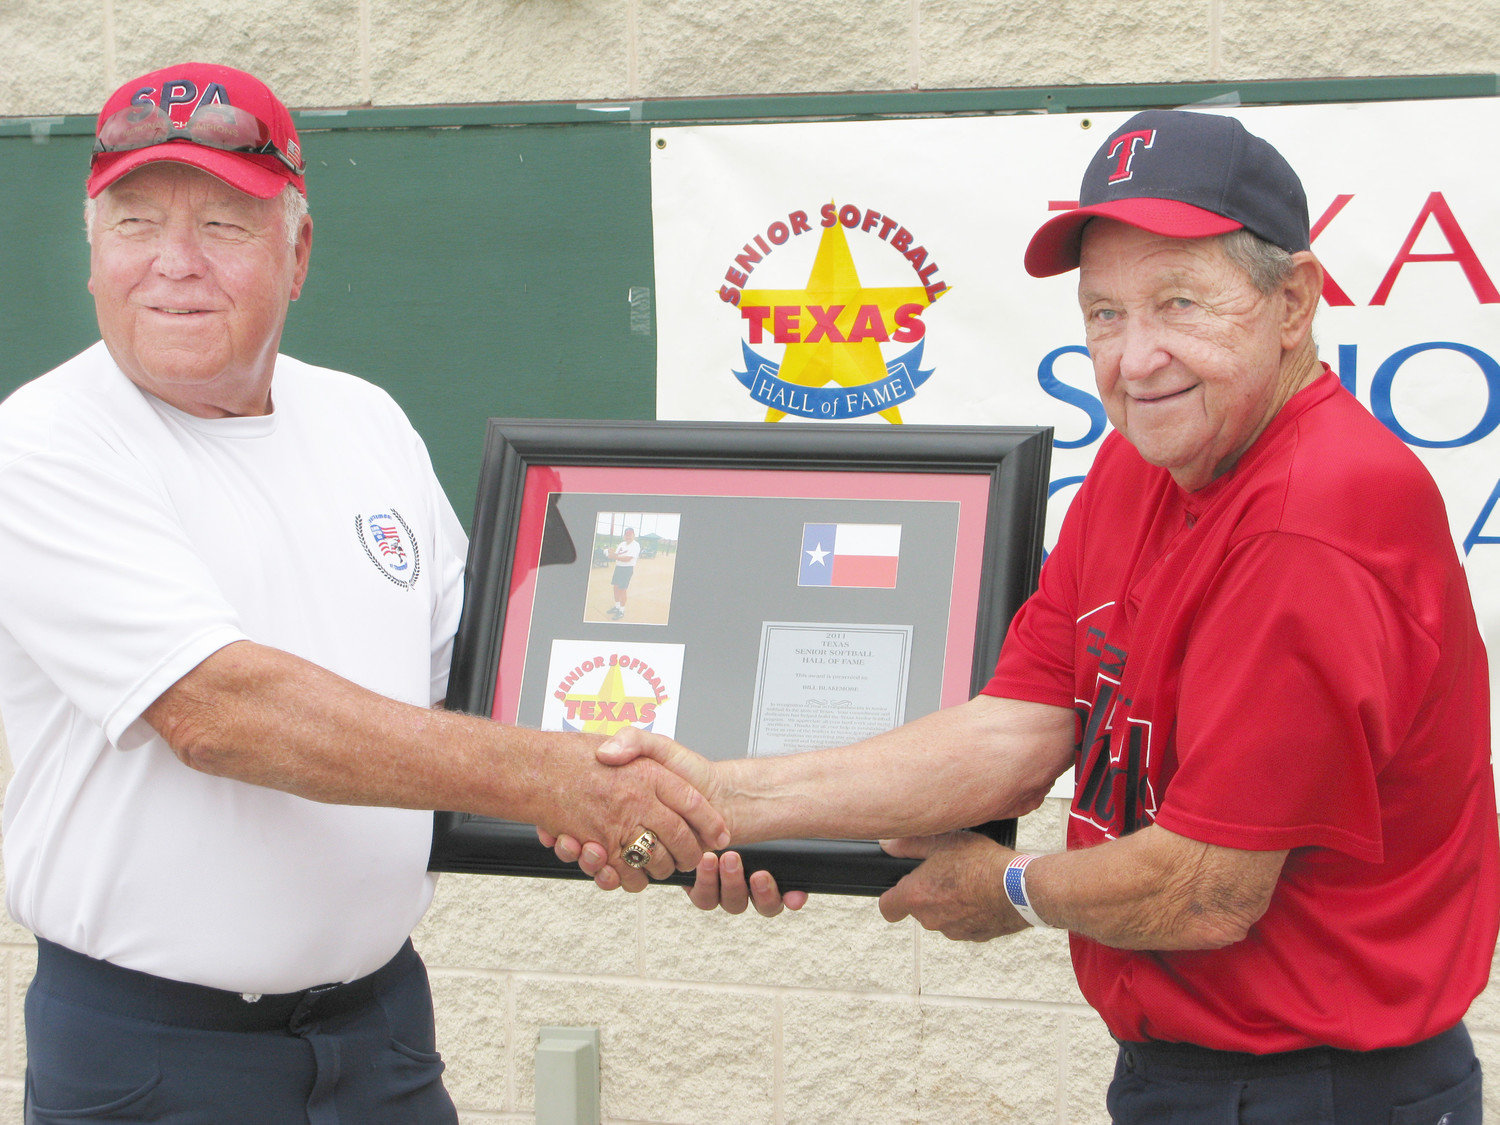 Bill Blakemore receives a plaque from Jon Bryan, an official with the National Senior Softball Players Association, during his induction into the Texas Senior Softball Hall of Fame in 2011.